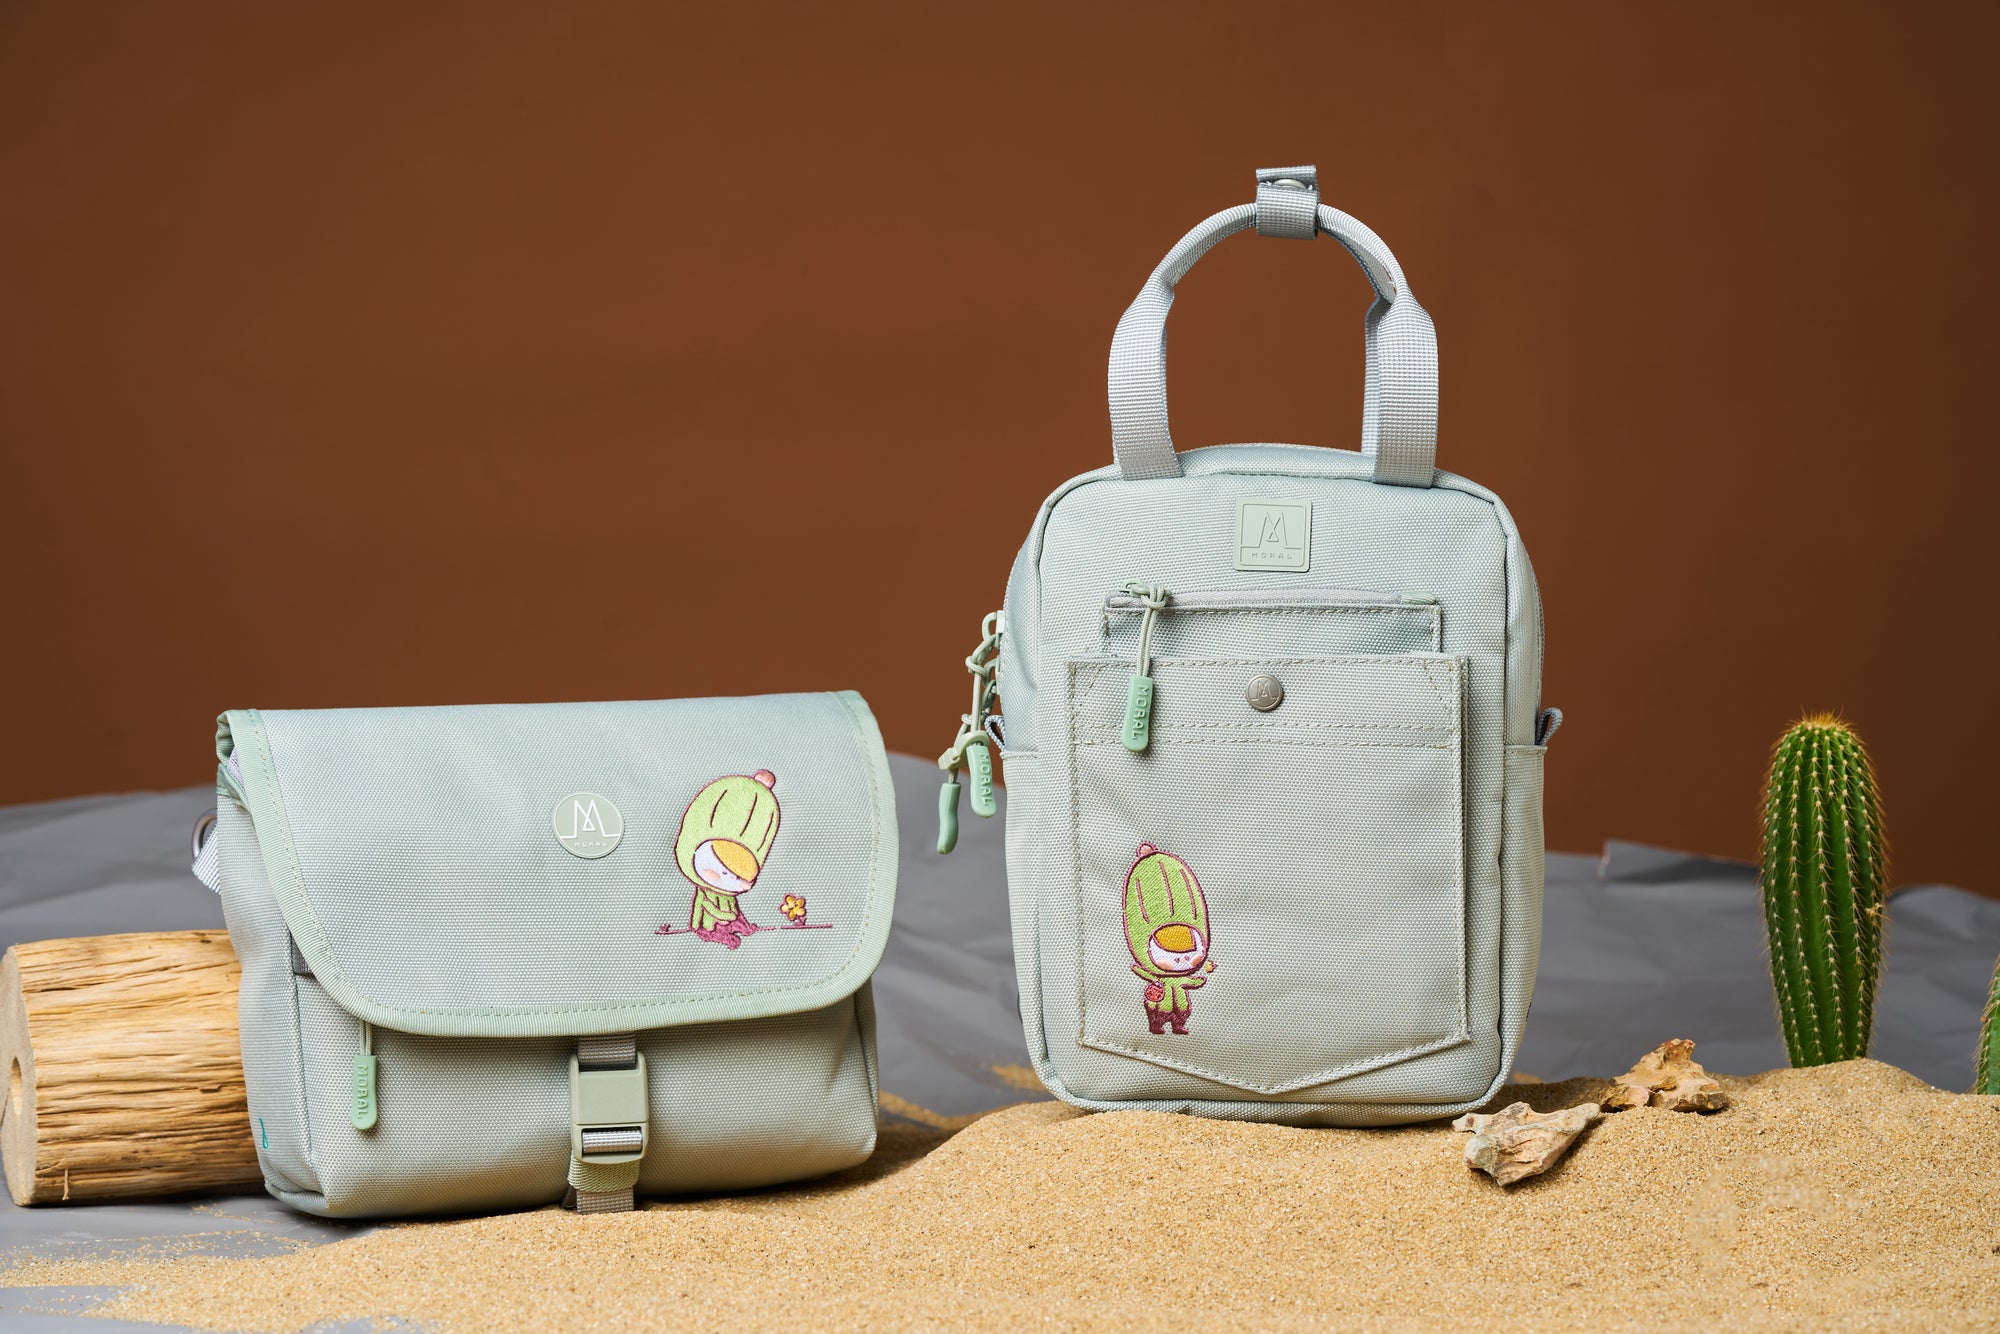 【Local Art Creation】The Little Greens Cactti x Moral Bags Collaborative Project